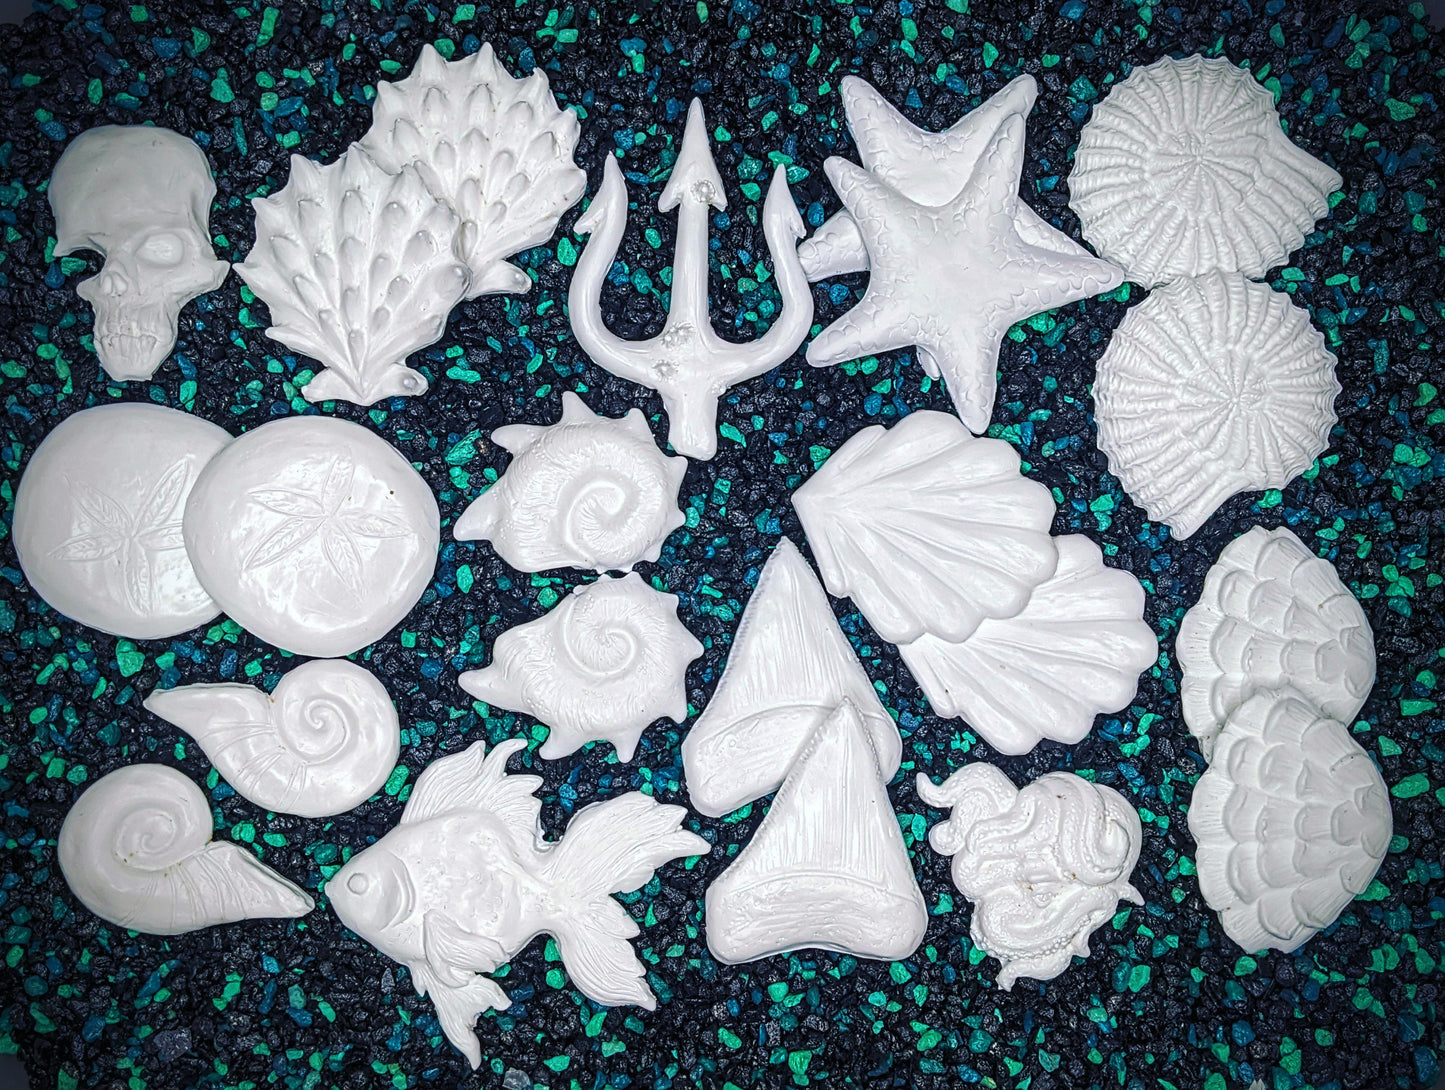 Blank plastic shell seashell set from IDfabrications ID Fabrications for cosplay crafting mermaid tops and merfolk accessories Black Abalone Barnacles Shell Set